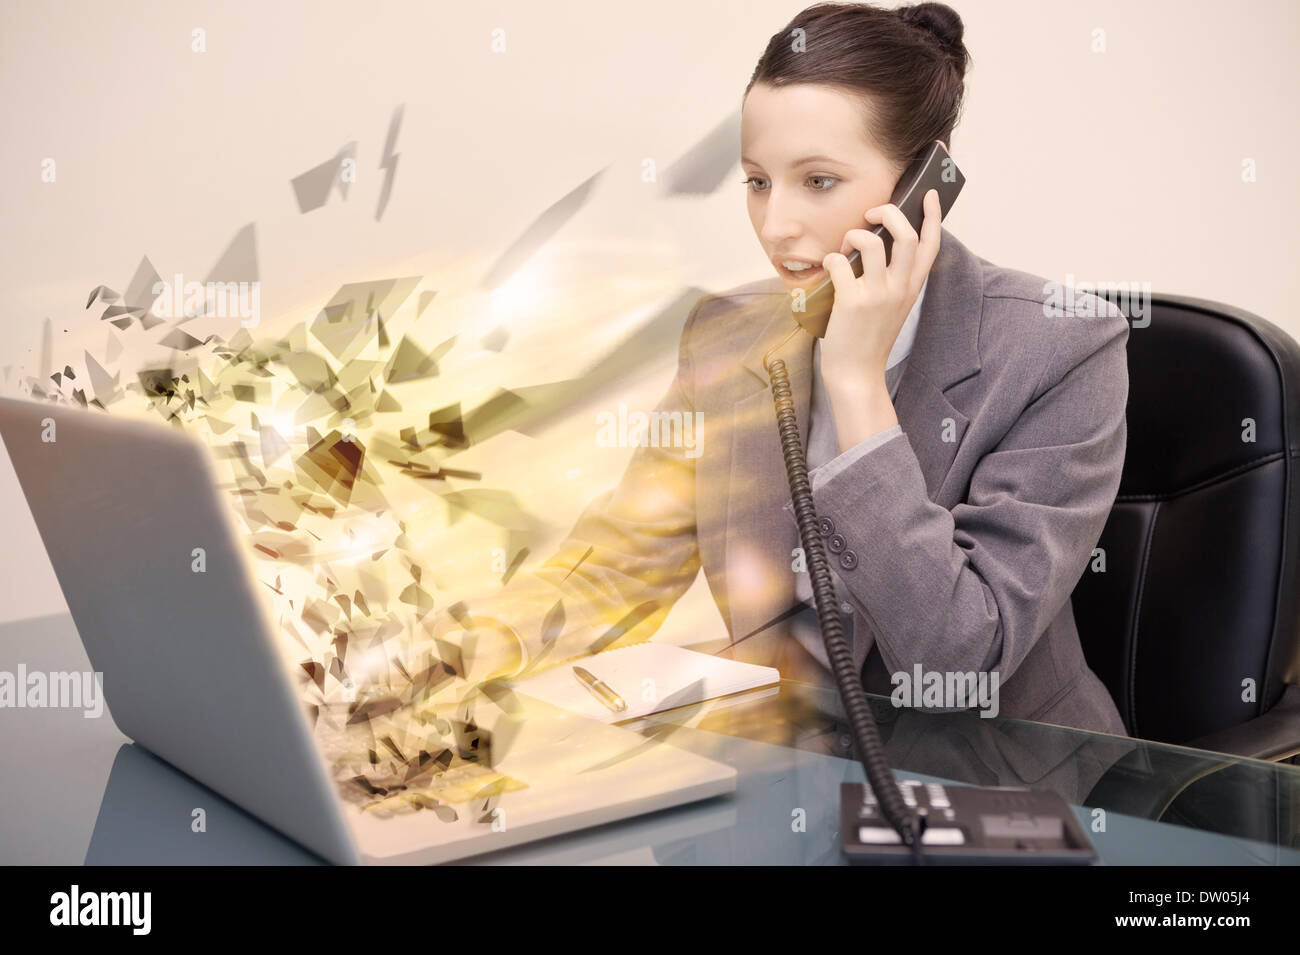 Laptop screen of a businesswoman exploding Stock Photo